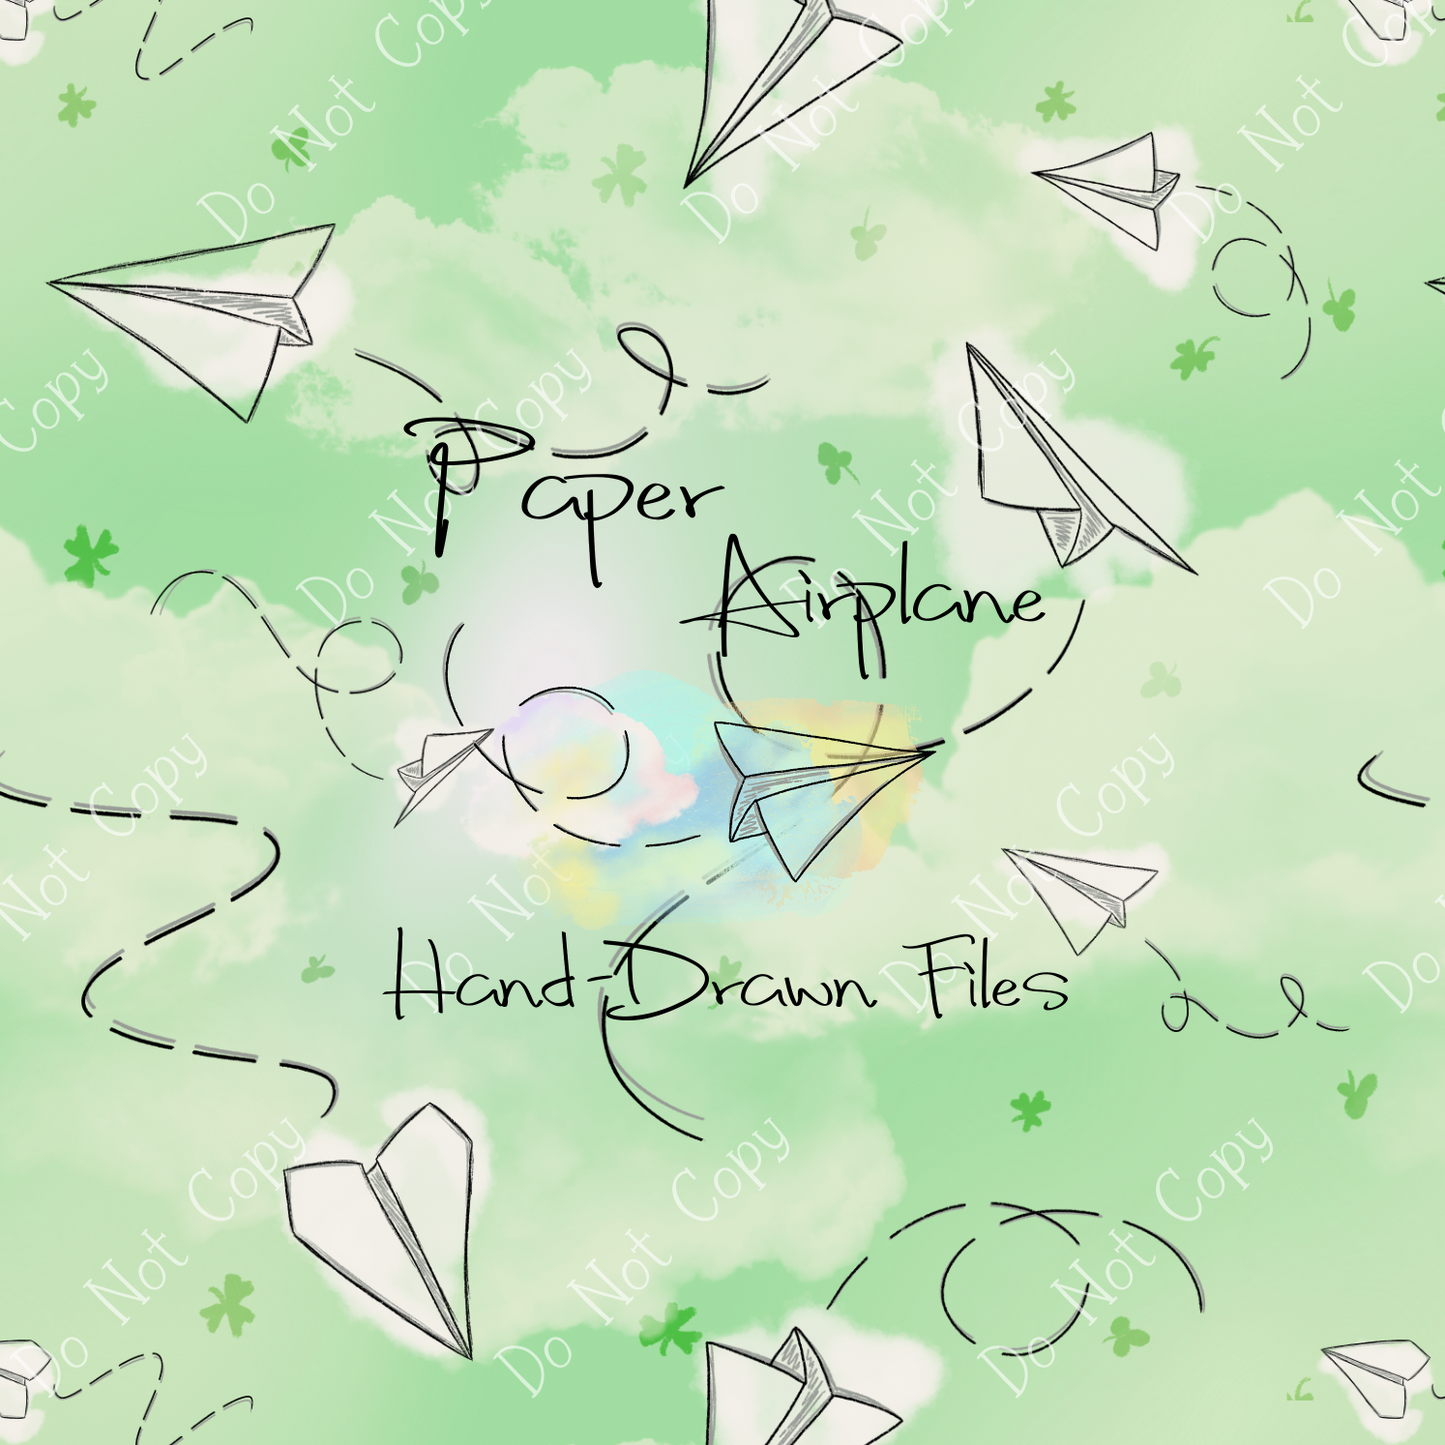 Paper Airplanes (Clovers)